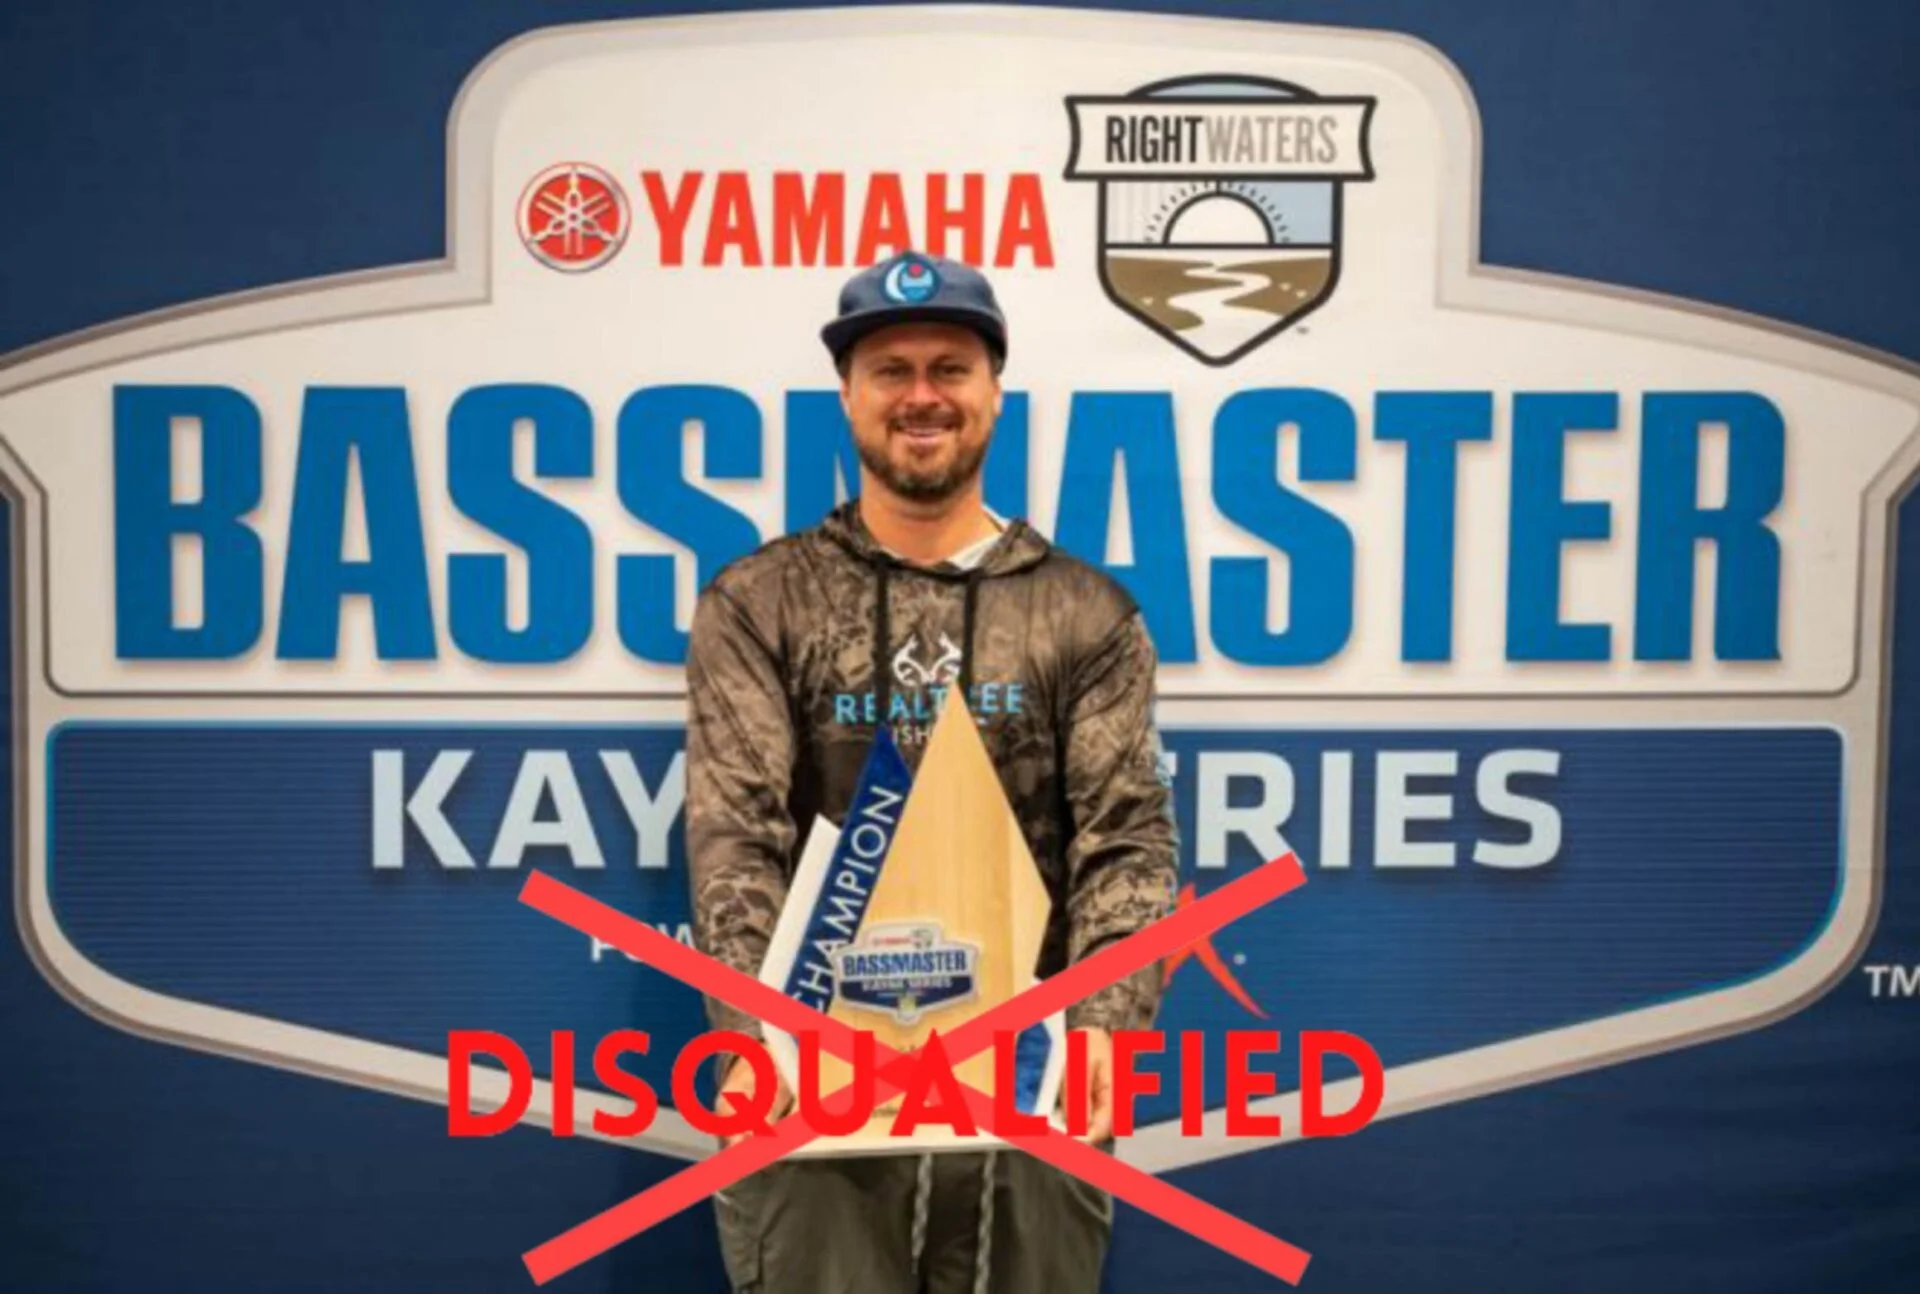 After an investigation and appeals process, Drew Gregory's disqualification from the 2022 Yamaha Rightwaters Bassmaster Kayak Series at Pickwick Lake presented by TourneyX has been overturned.